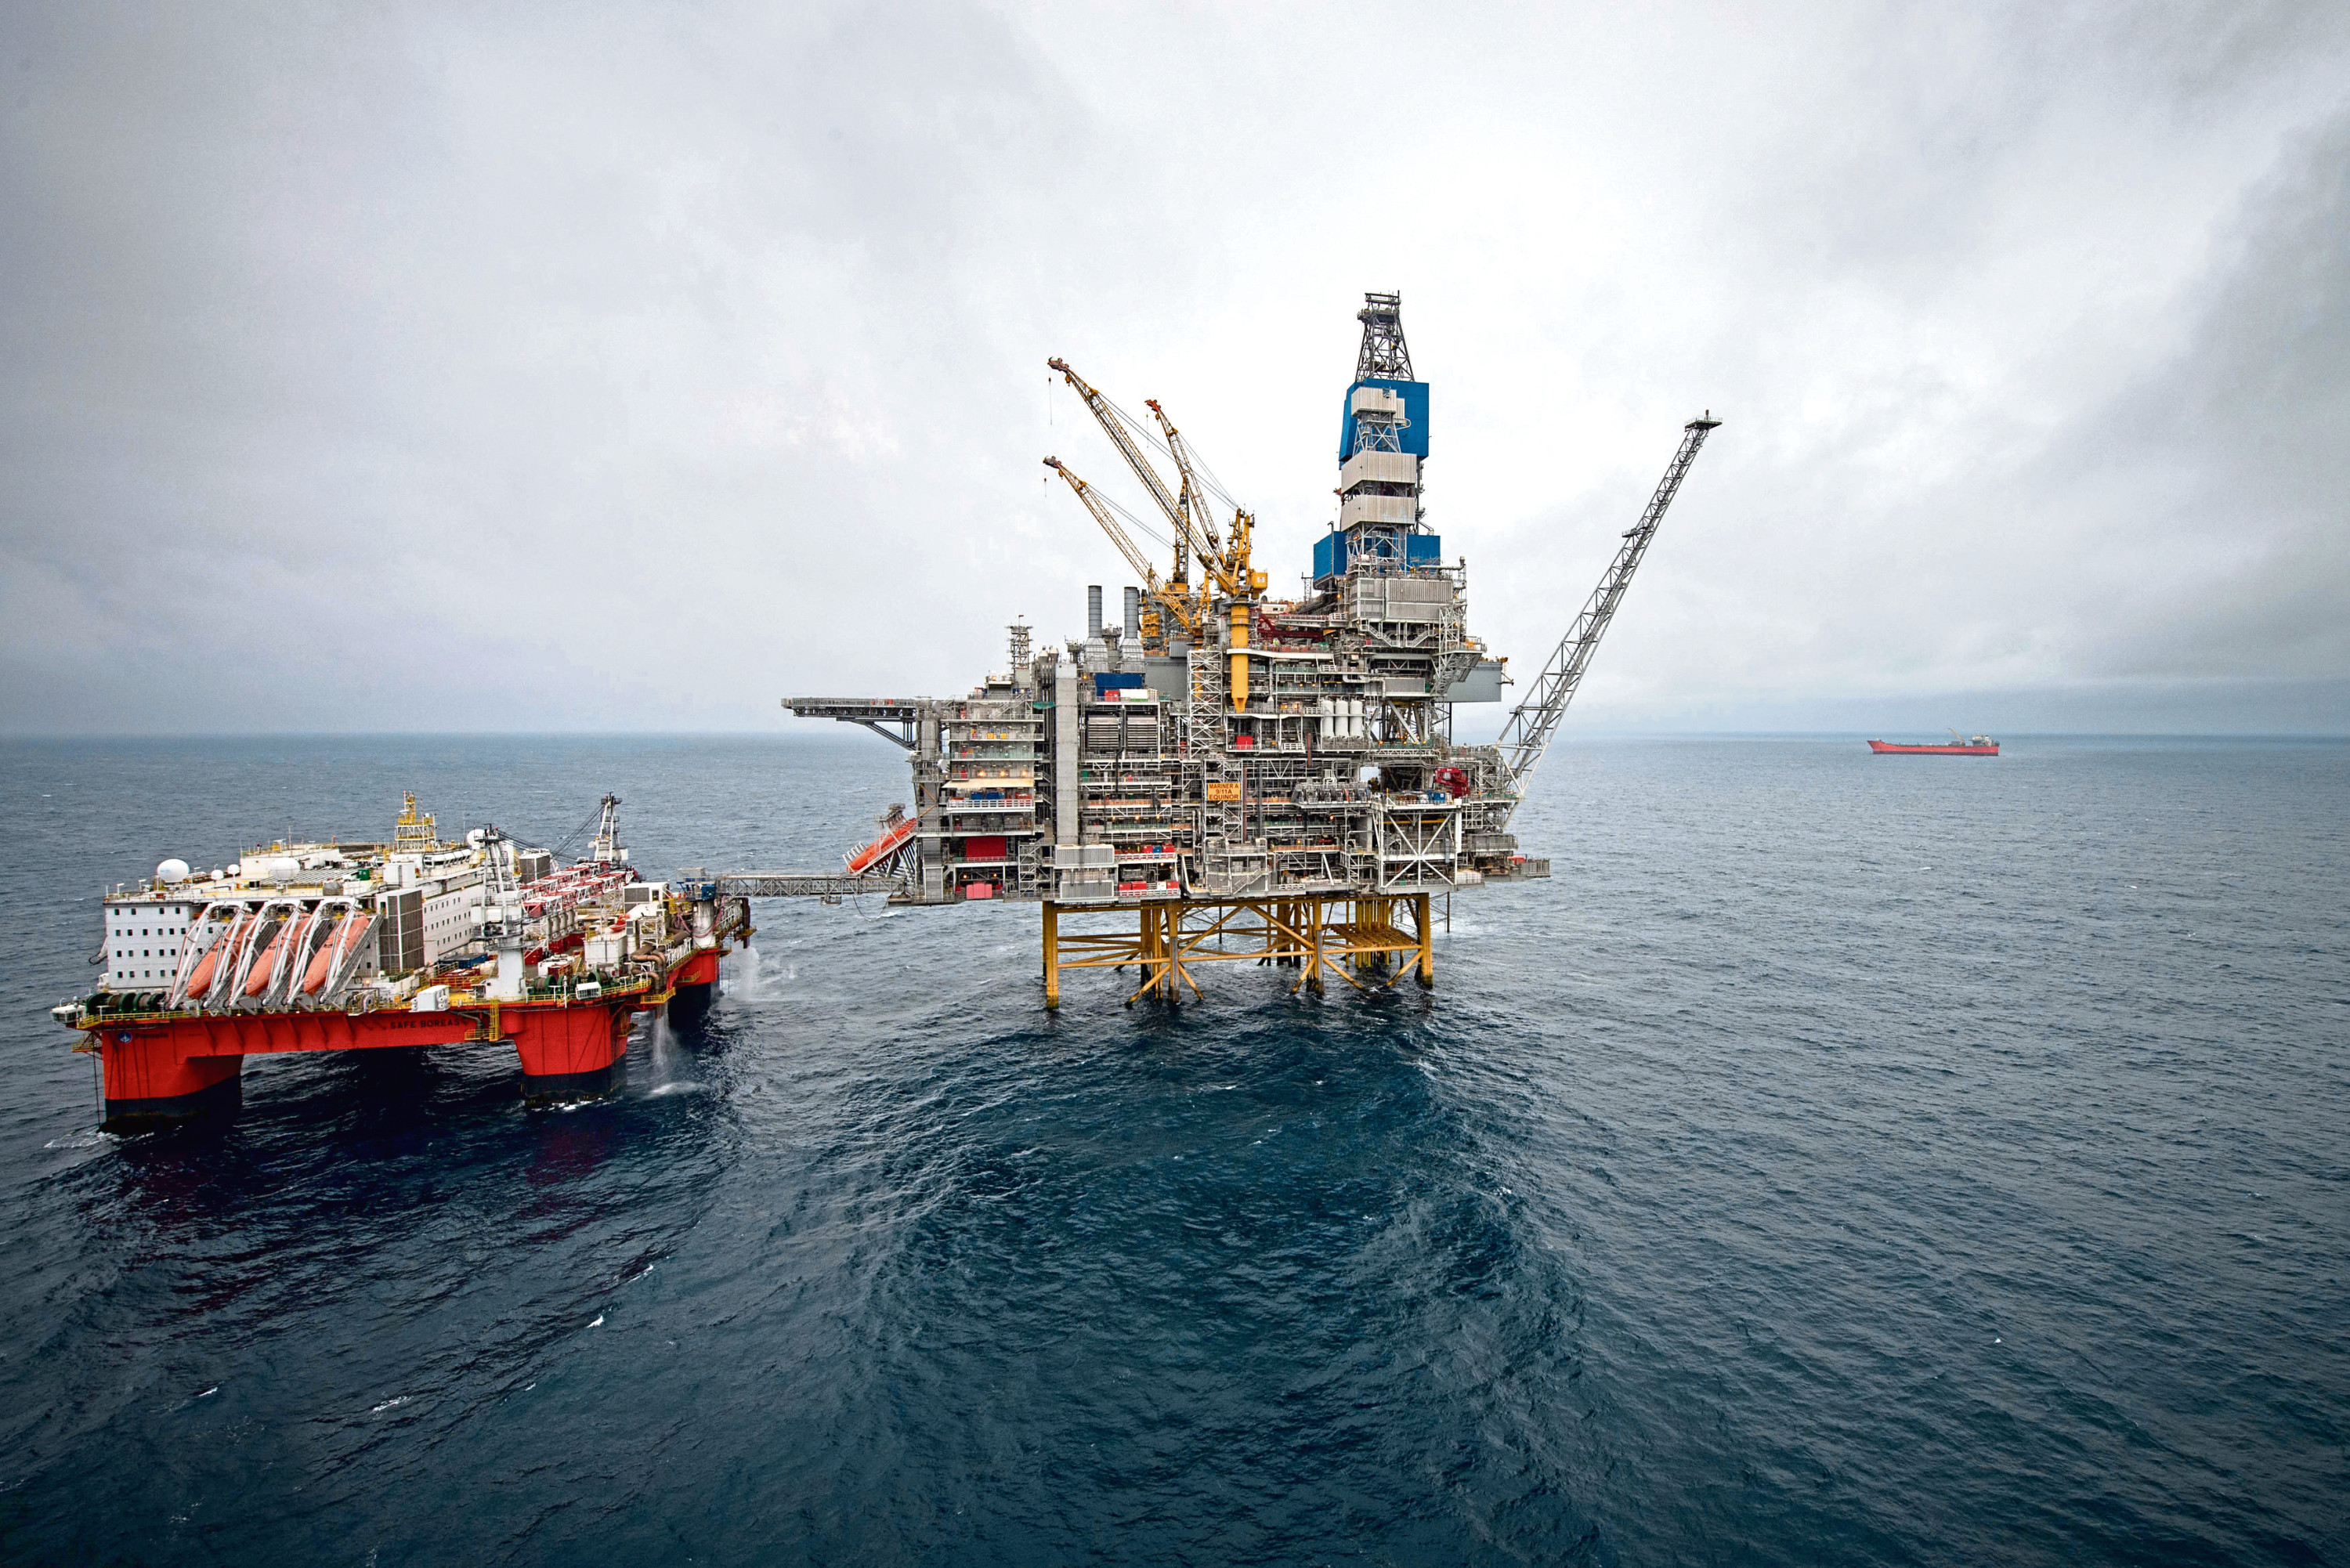 North Sea infrastructure should be used to drive carbon capture, the report states.